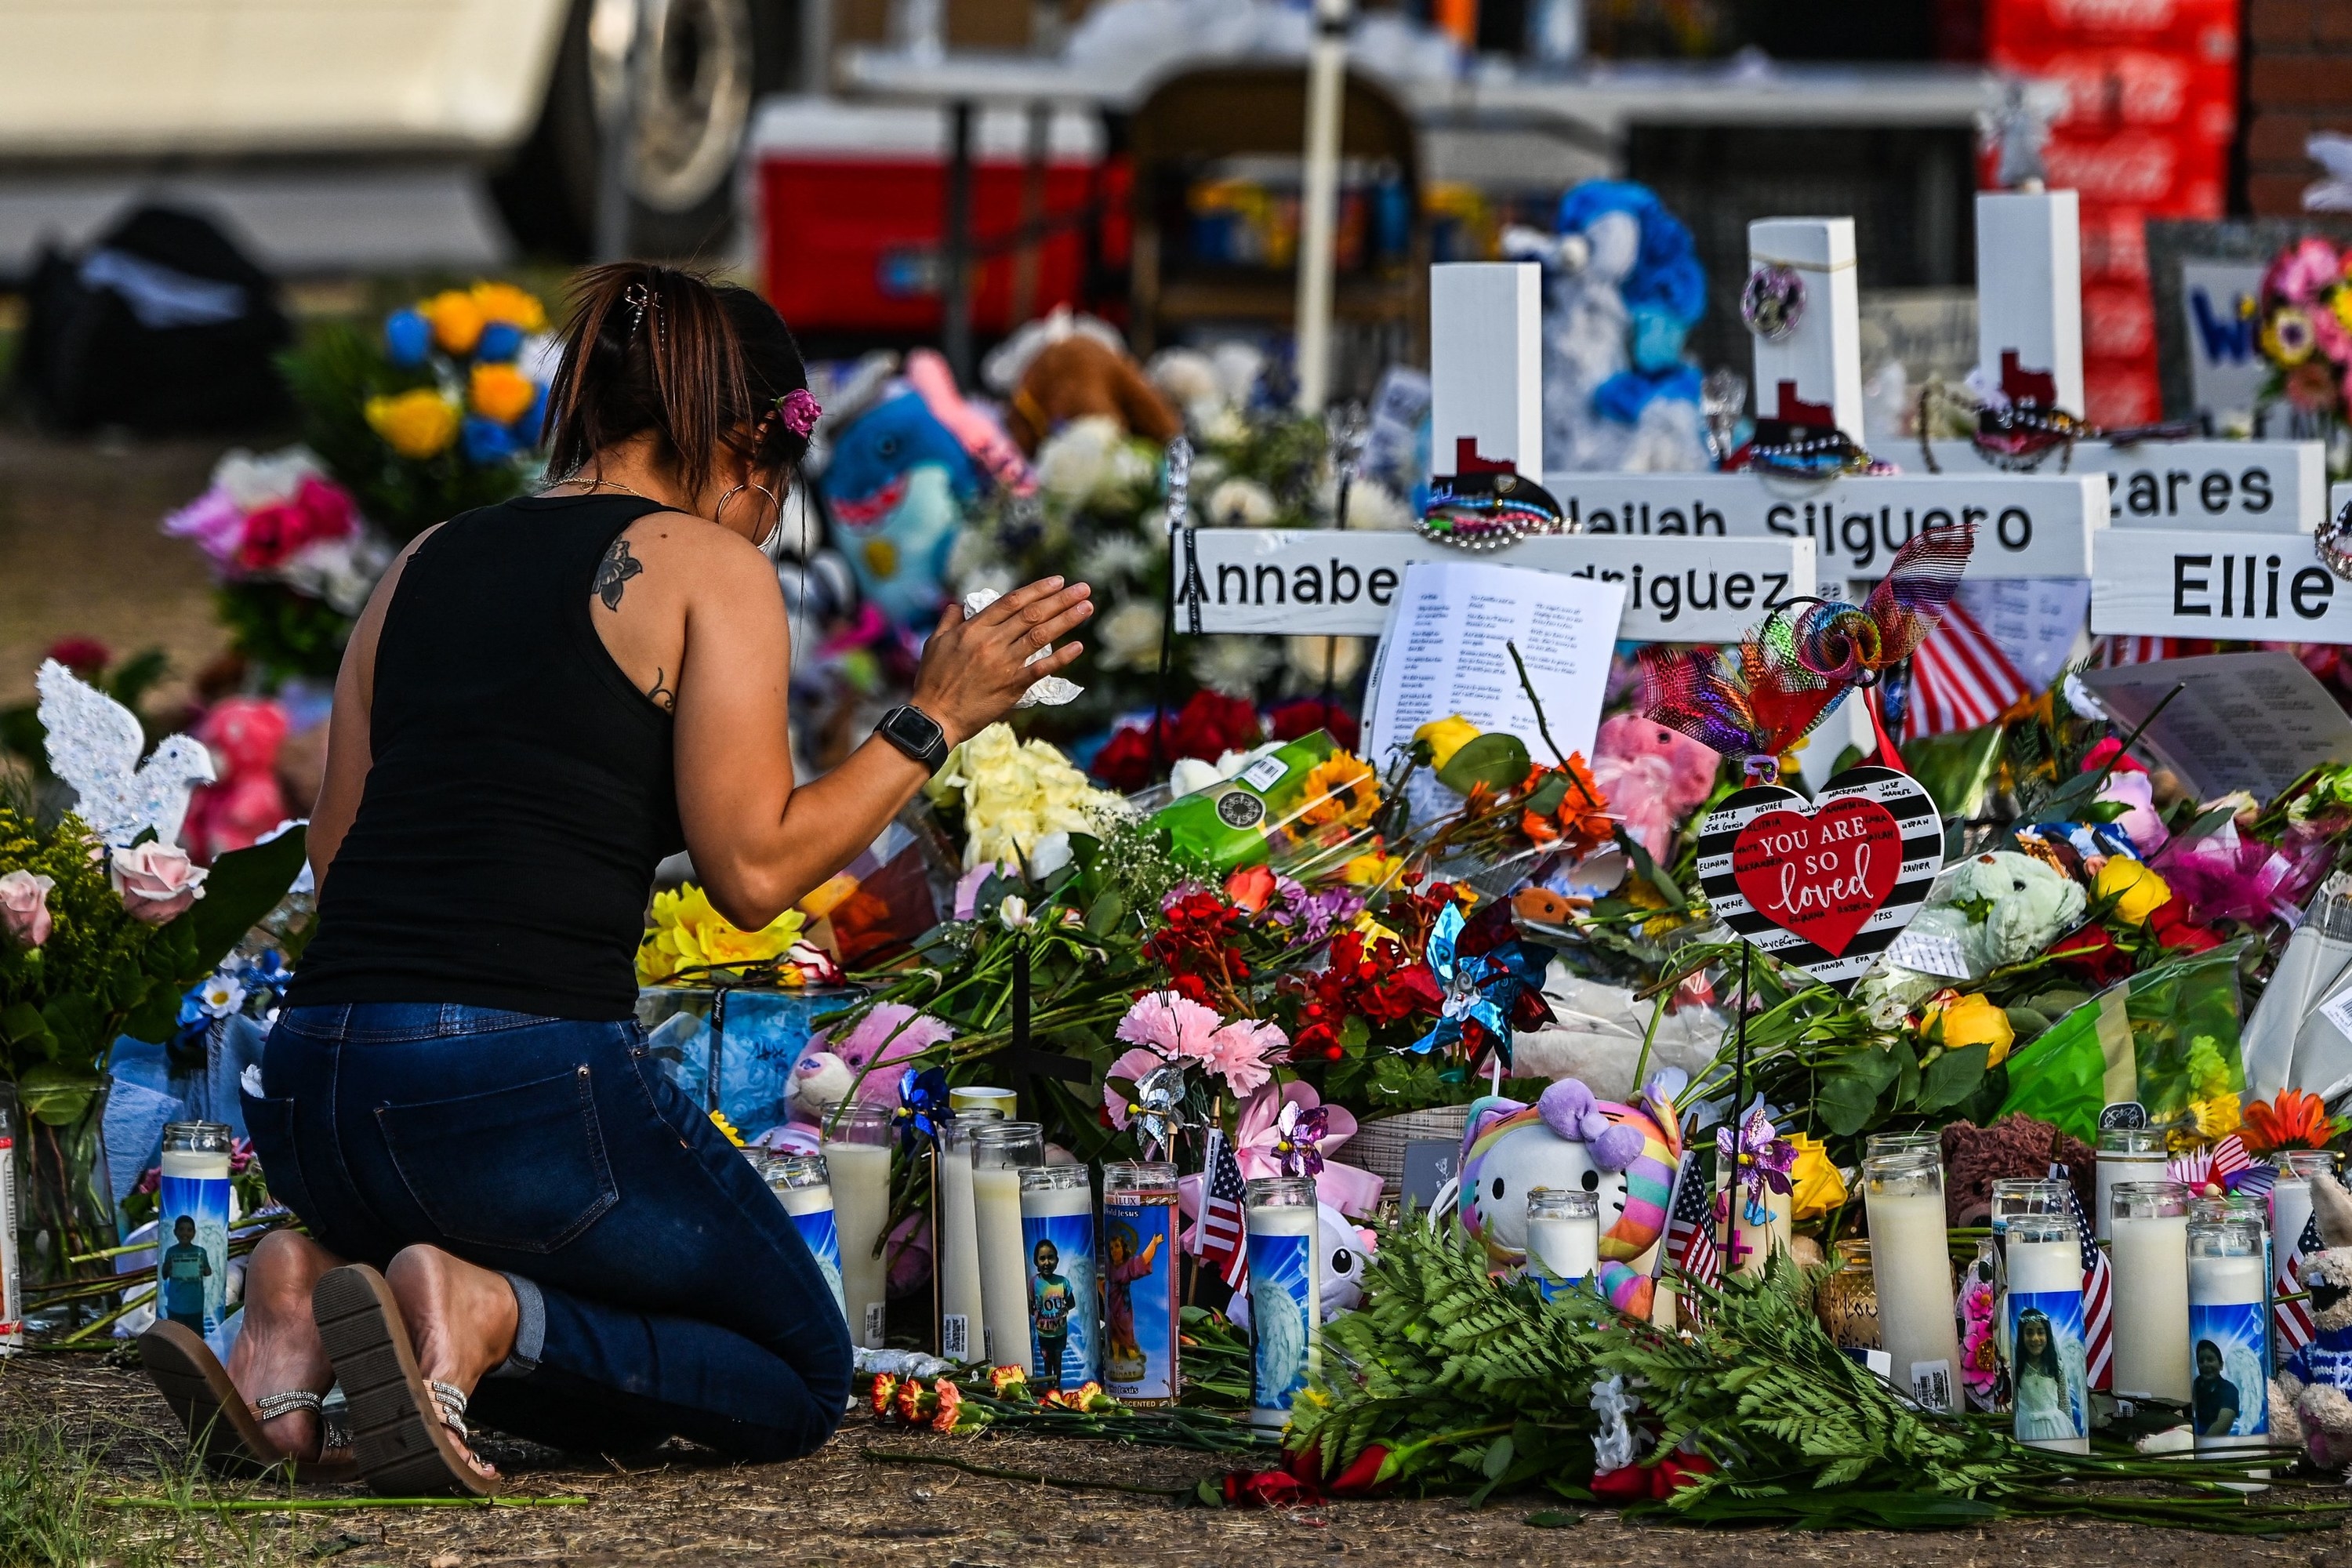 A woman kneels in front of a large arrangement of candles, flowers, and the names of victims of the shooting on crosses